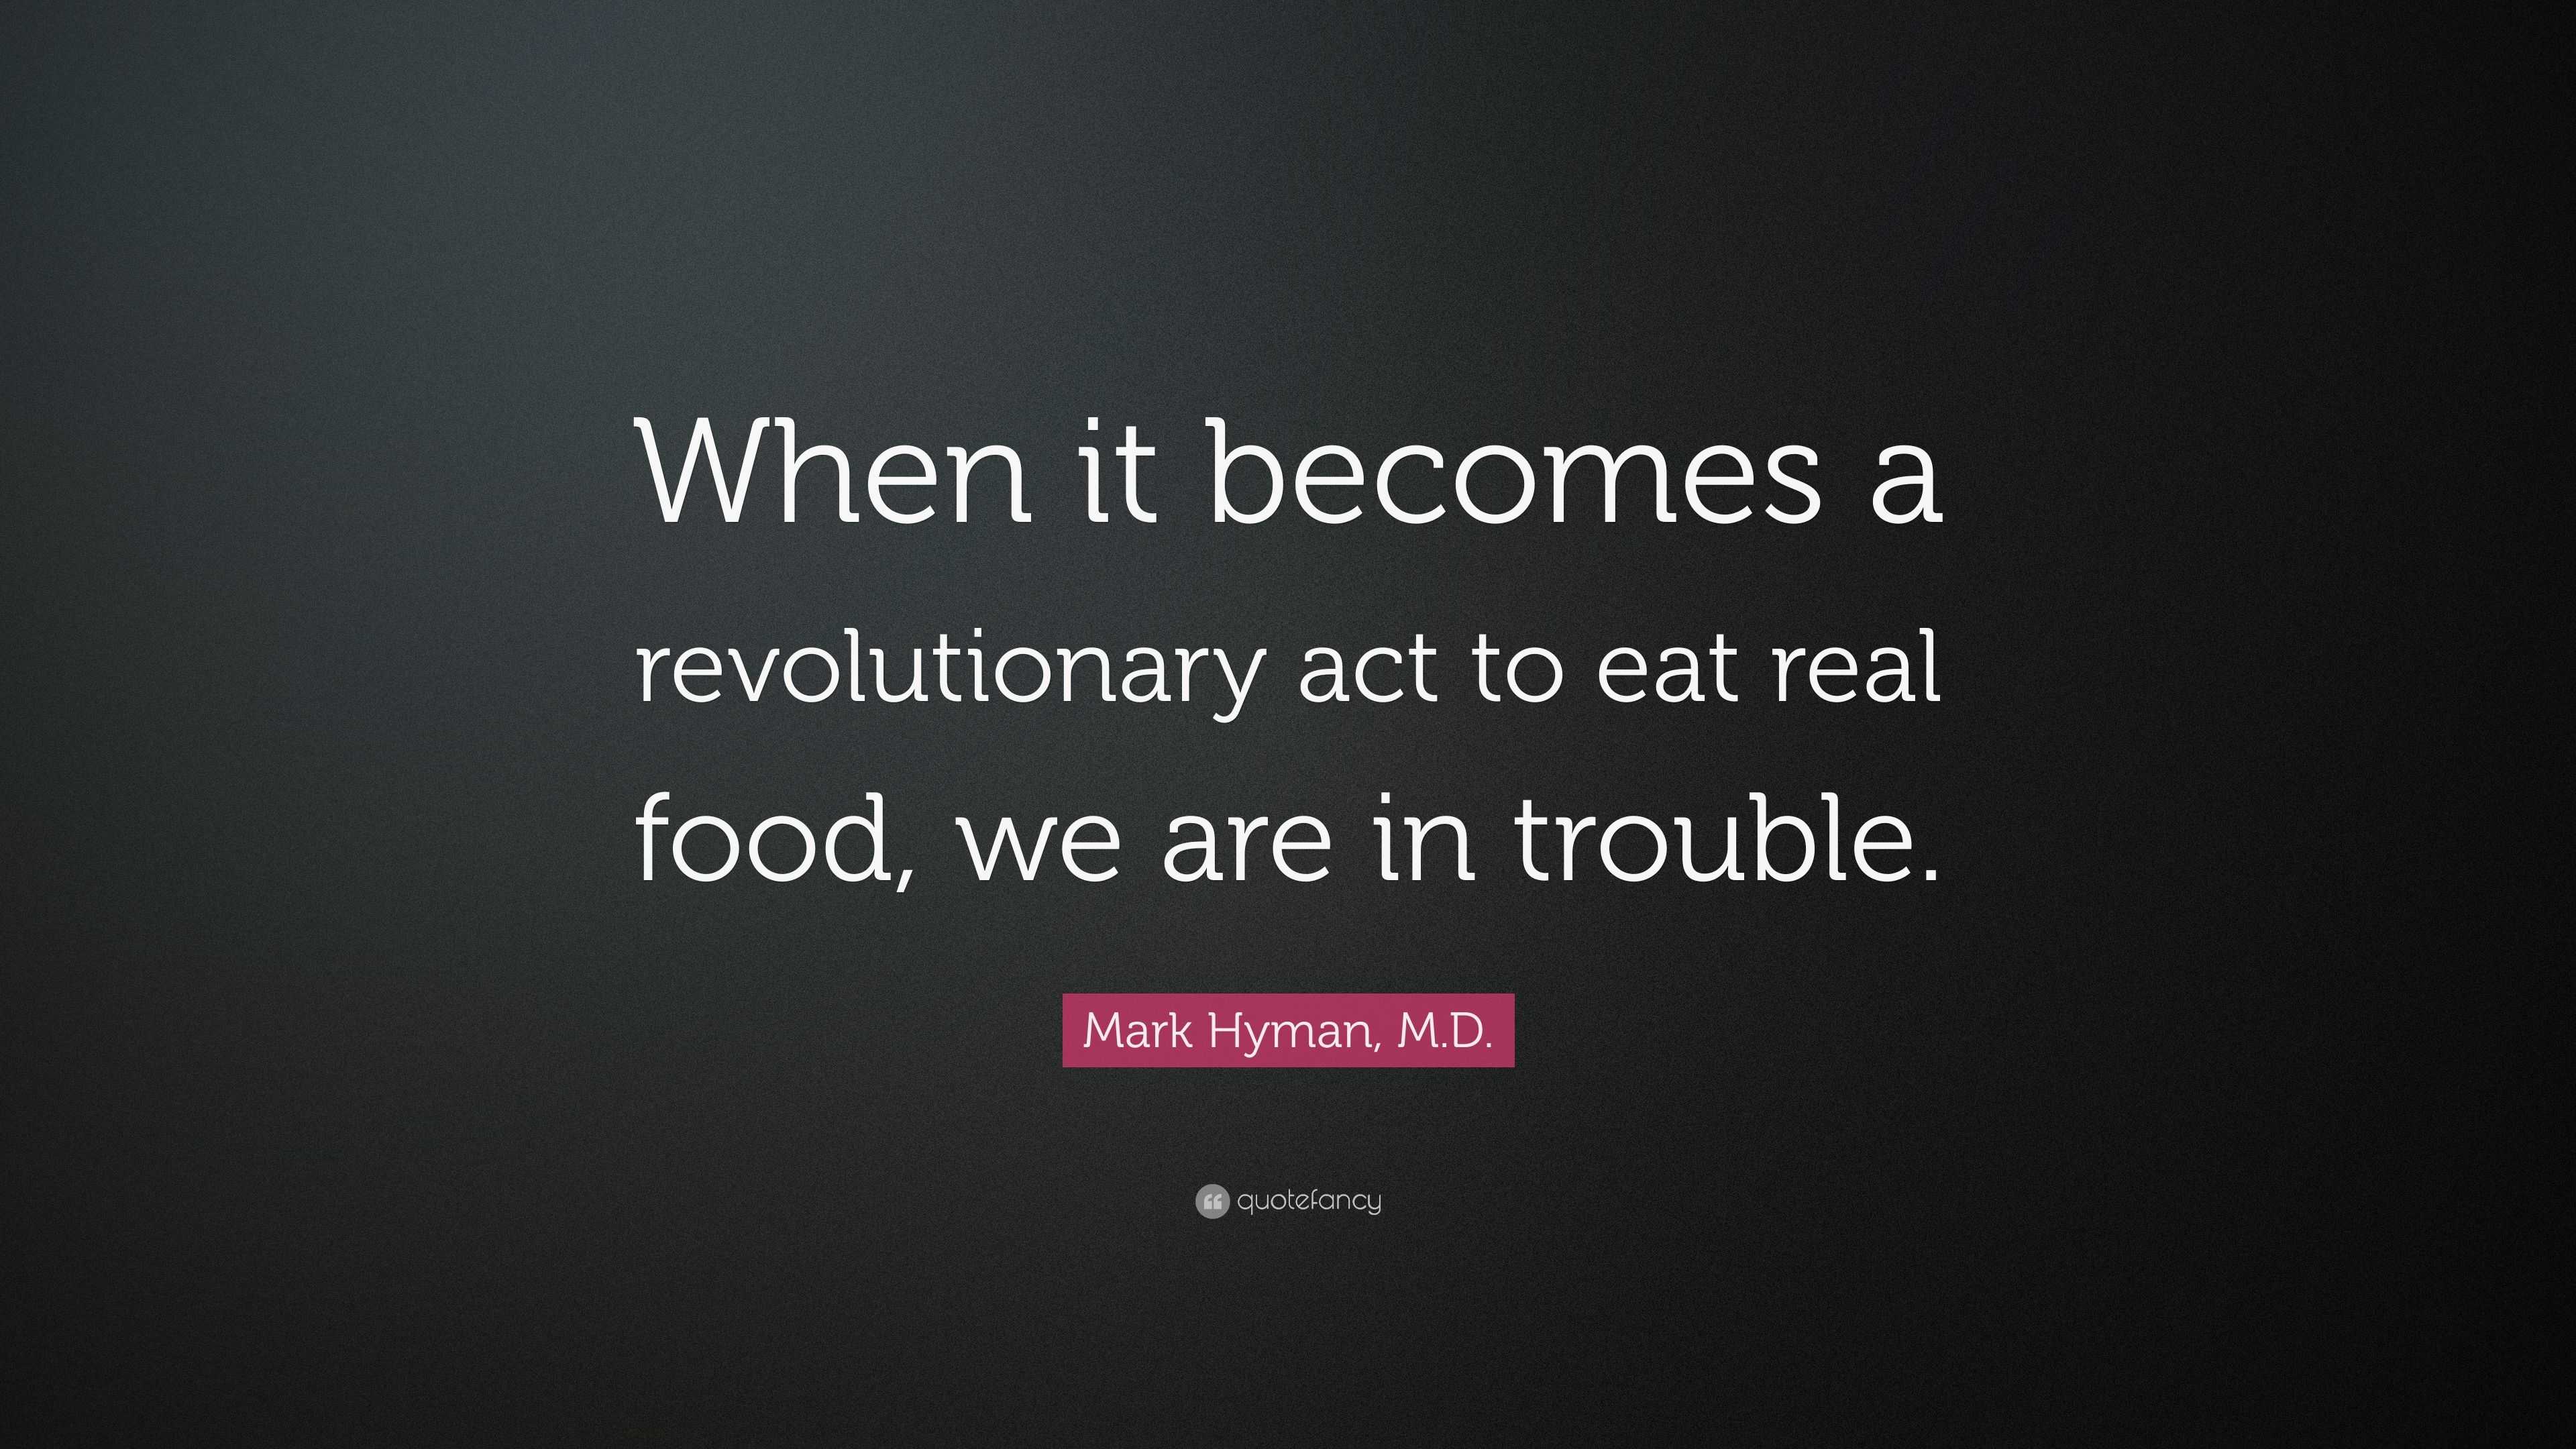 Mark Hyman, M.D. Quote: “When it becomes a revolutionary act to eat real  food, we are